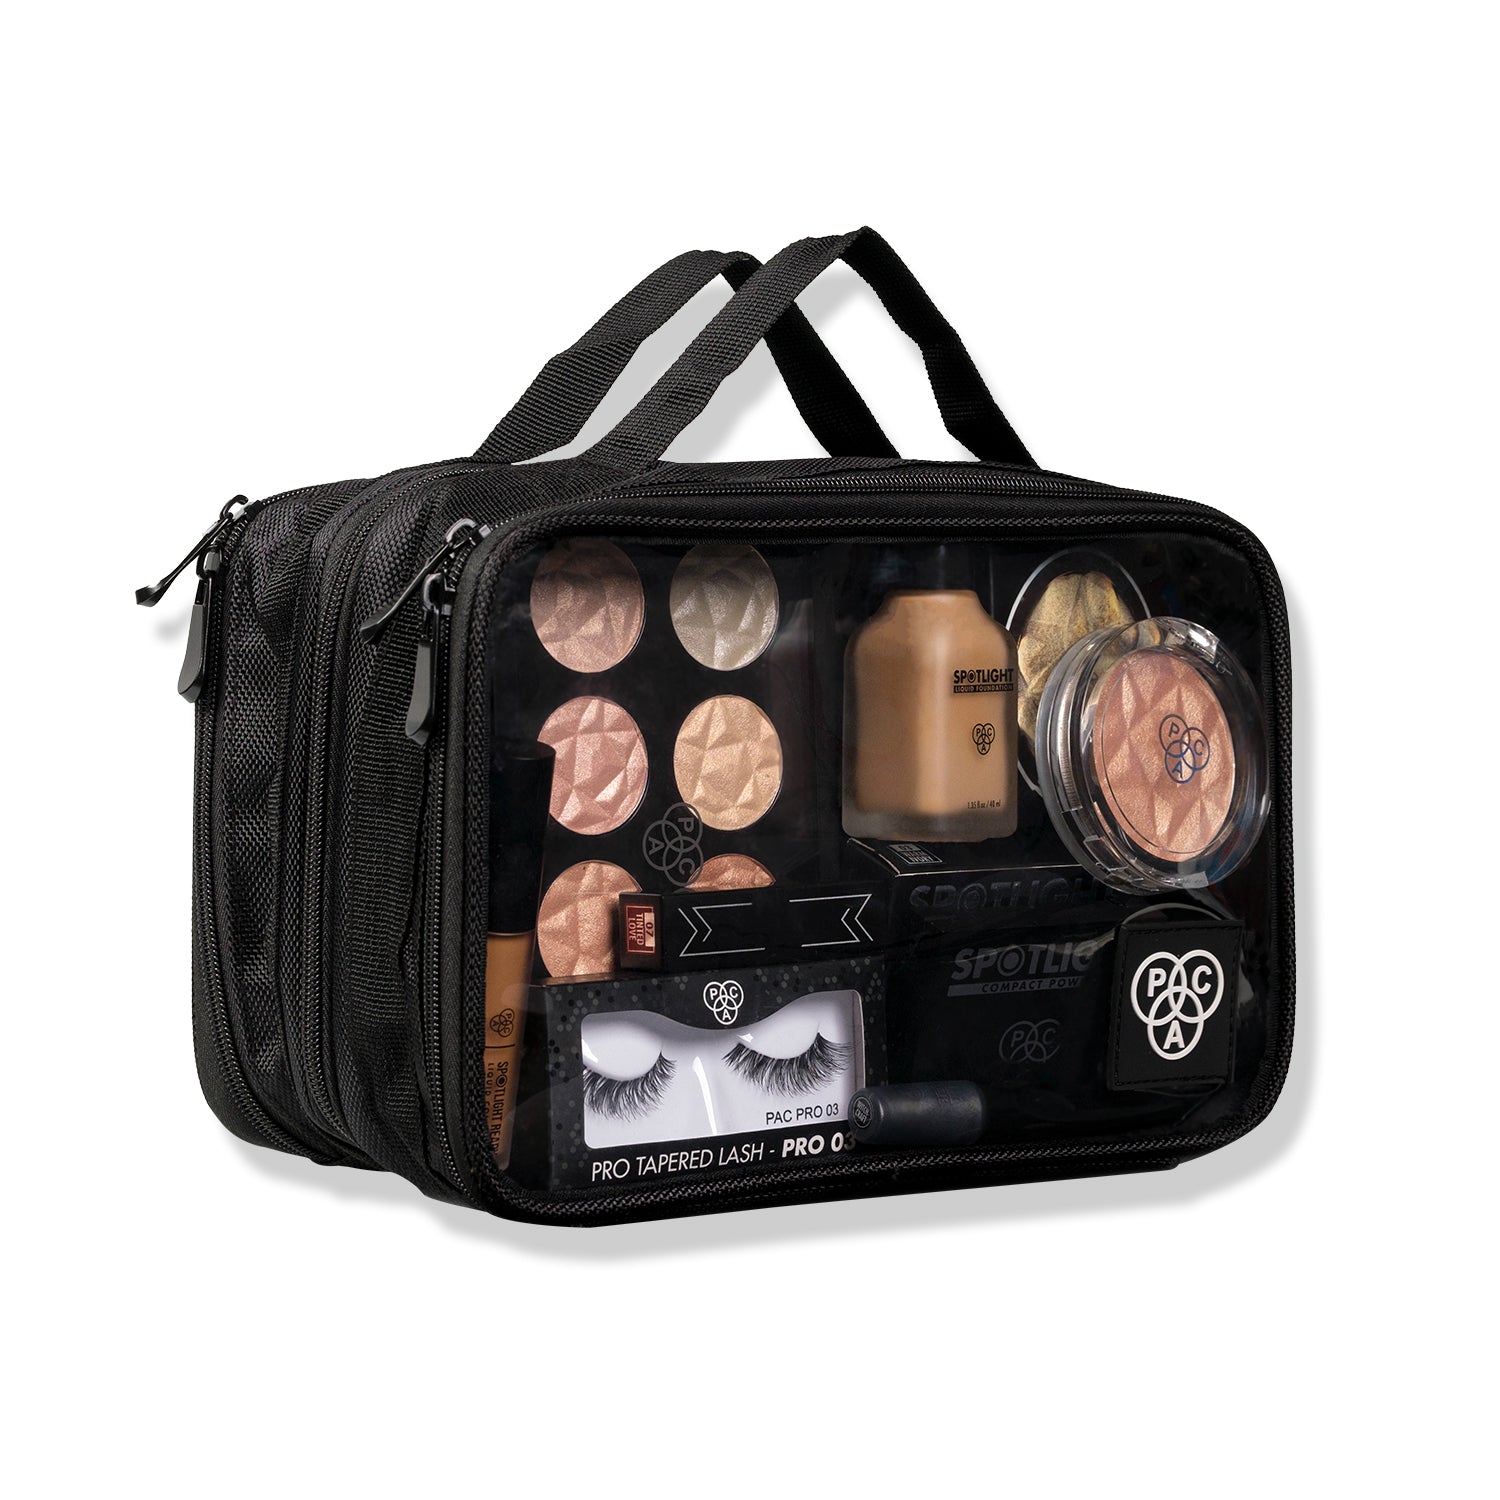 PAC Cosmetics Travel With Me Makeup Pouch